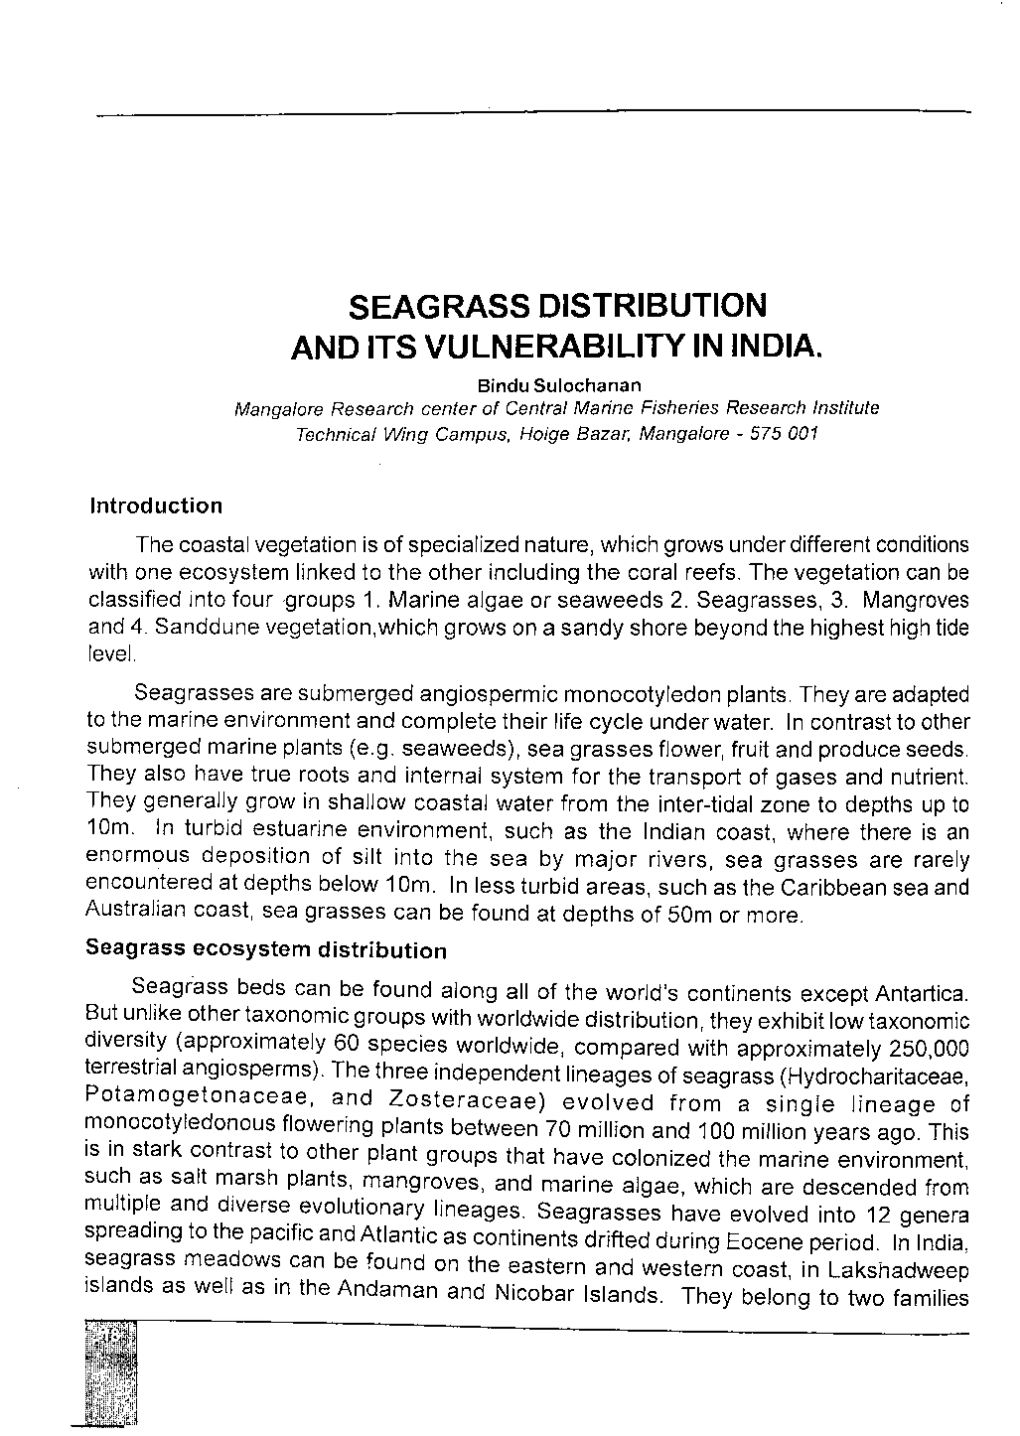 SEAGRASS DISTRIBUTION and ITS VULNERABILITY in INDIA. Bindu Sulochanan Mangalore Research Center of Ceritral Marine Fisheries Research Institute Technical Wing Campus